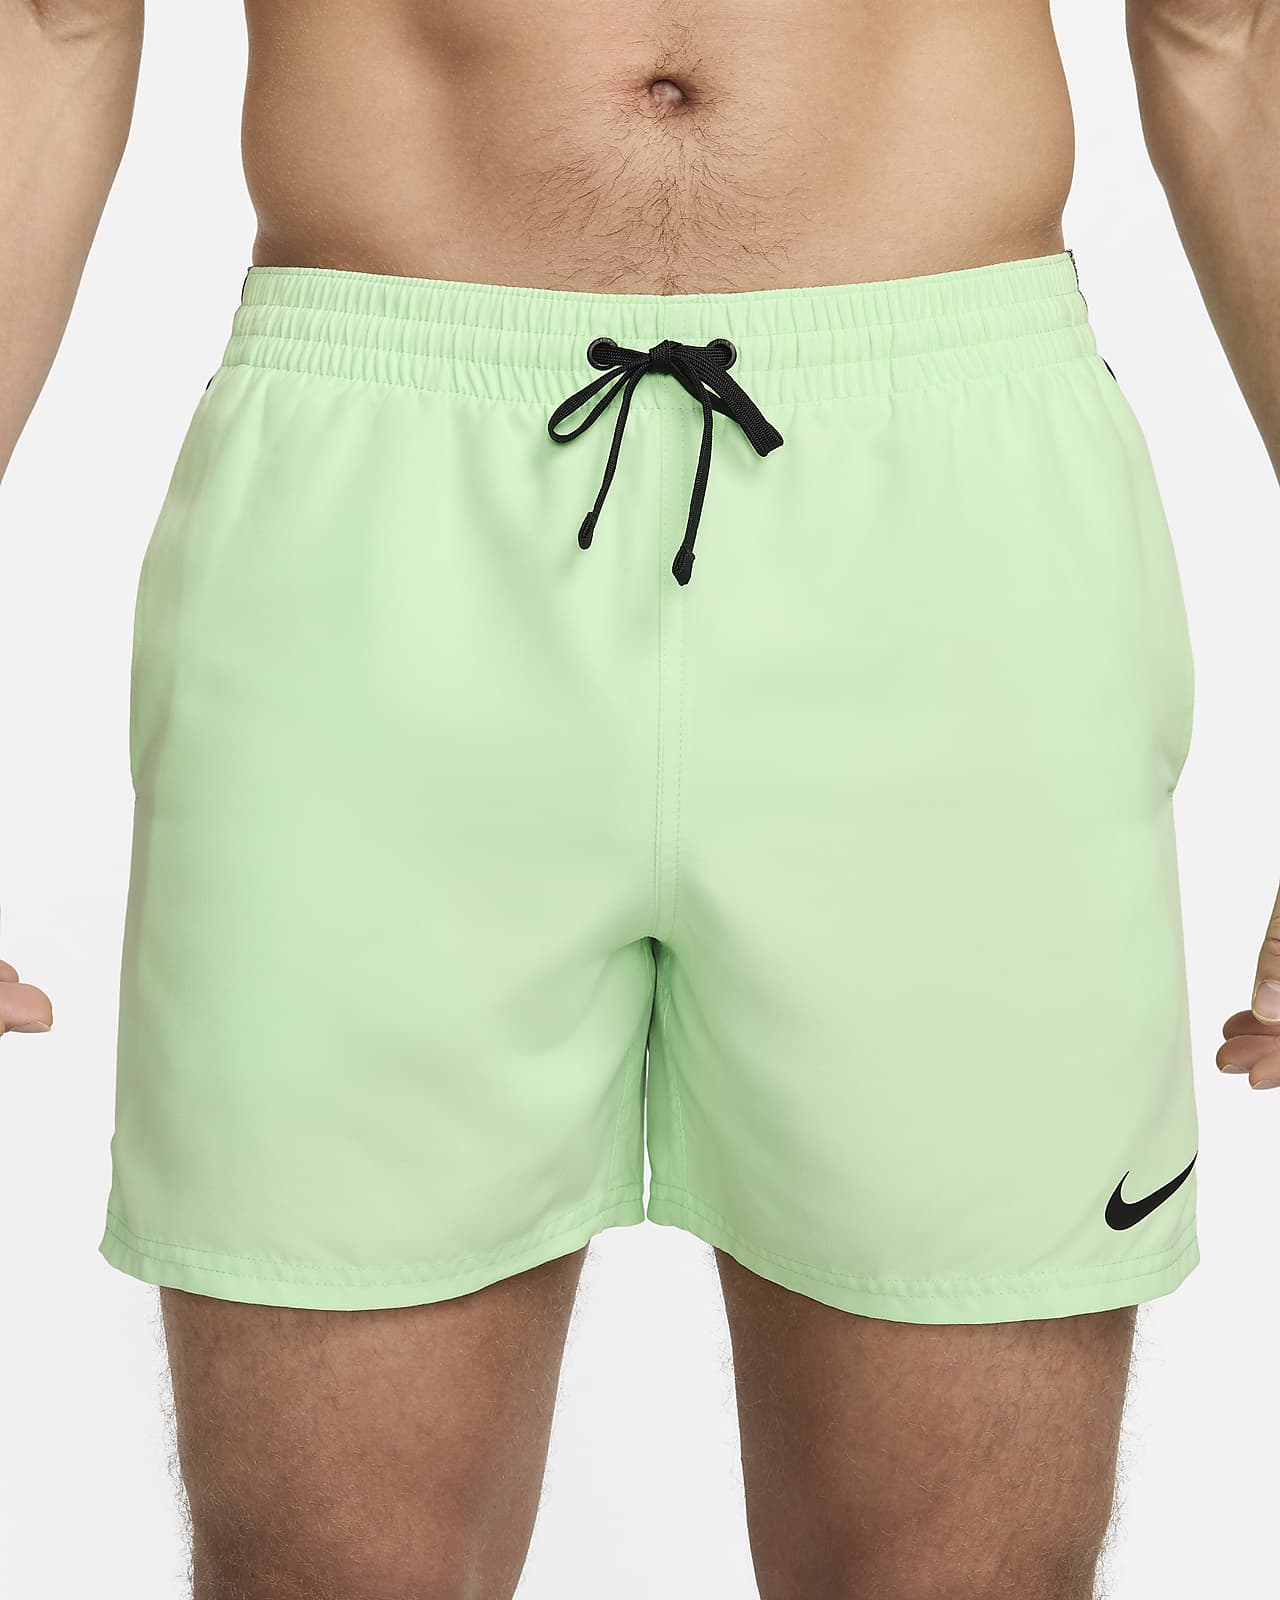 Nike Swimming 5 inch large double Swoosh shorts in lime green